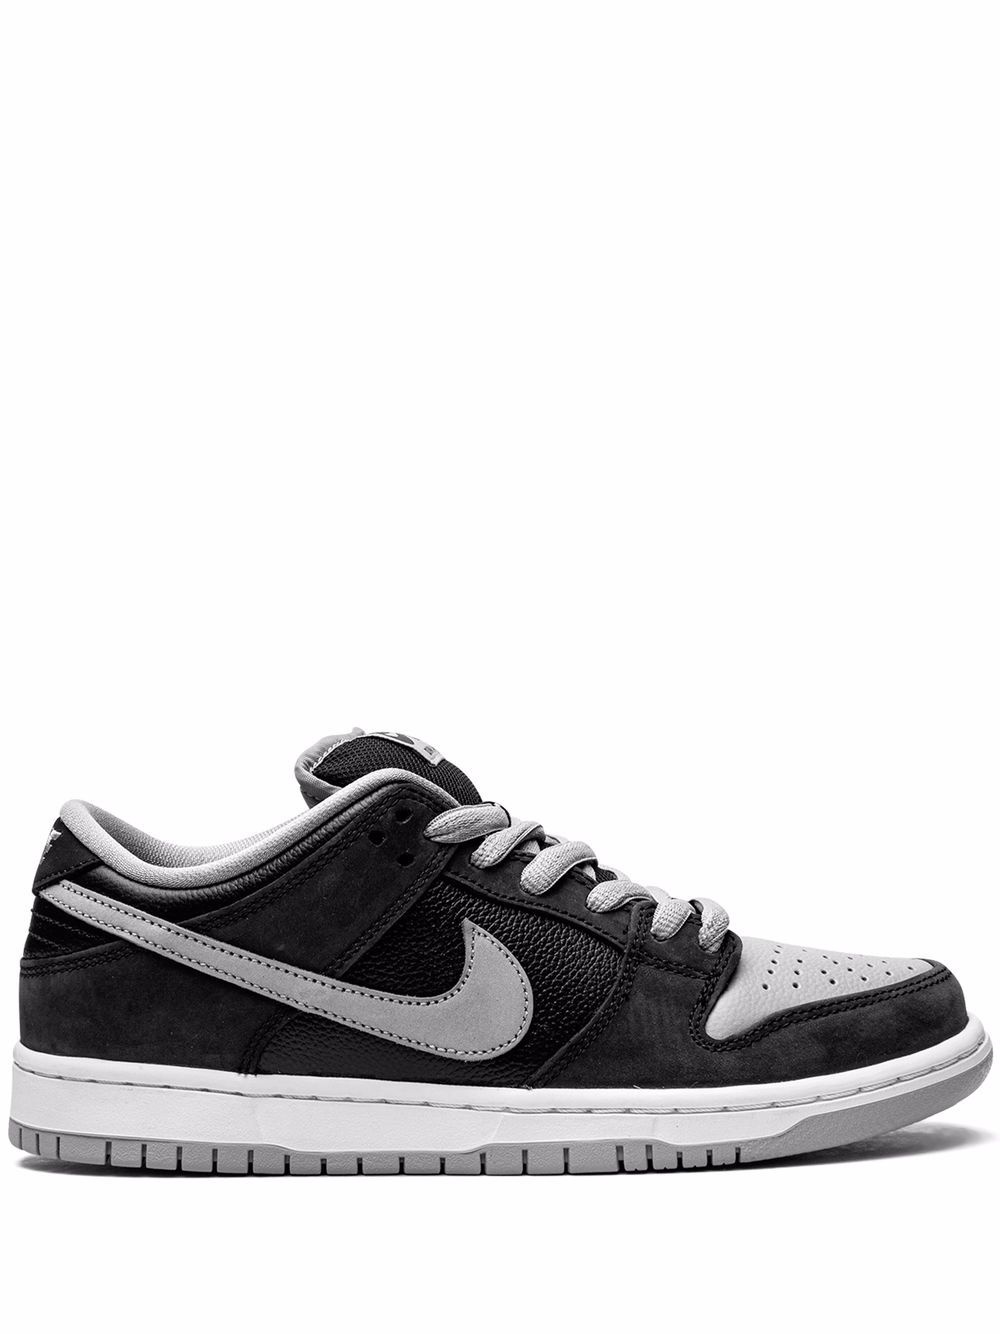 SB Dunk Low Pro "J-Pack - Shadow" sneakers - 1